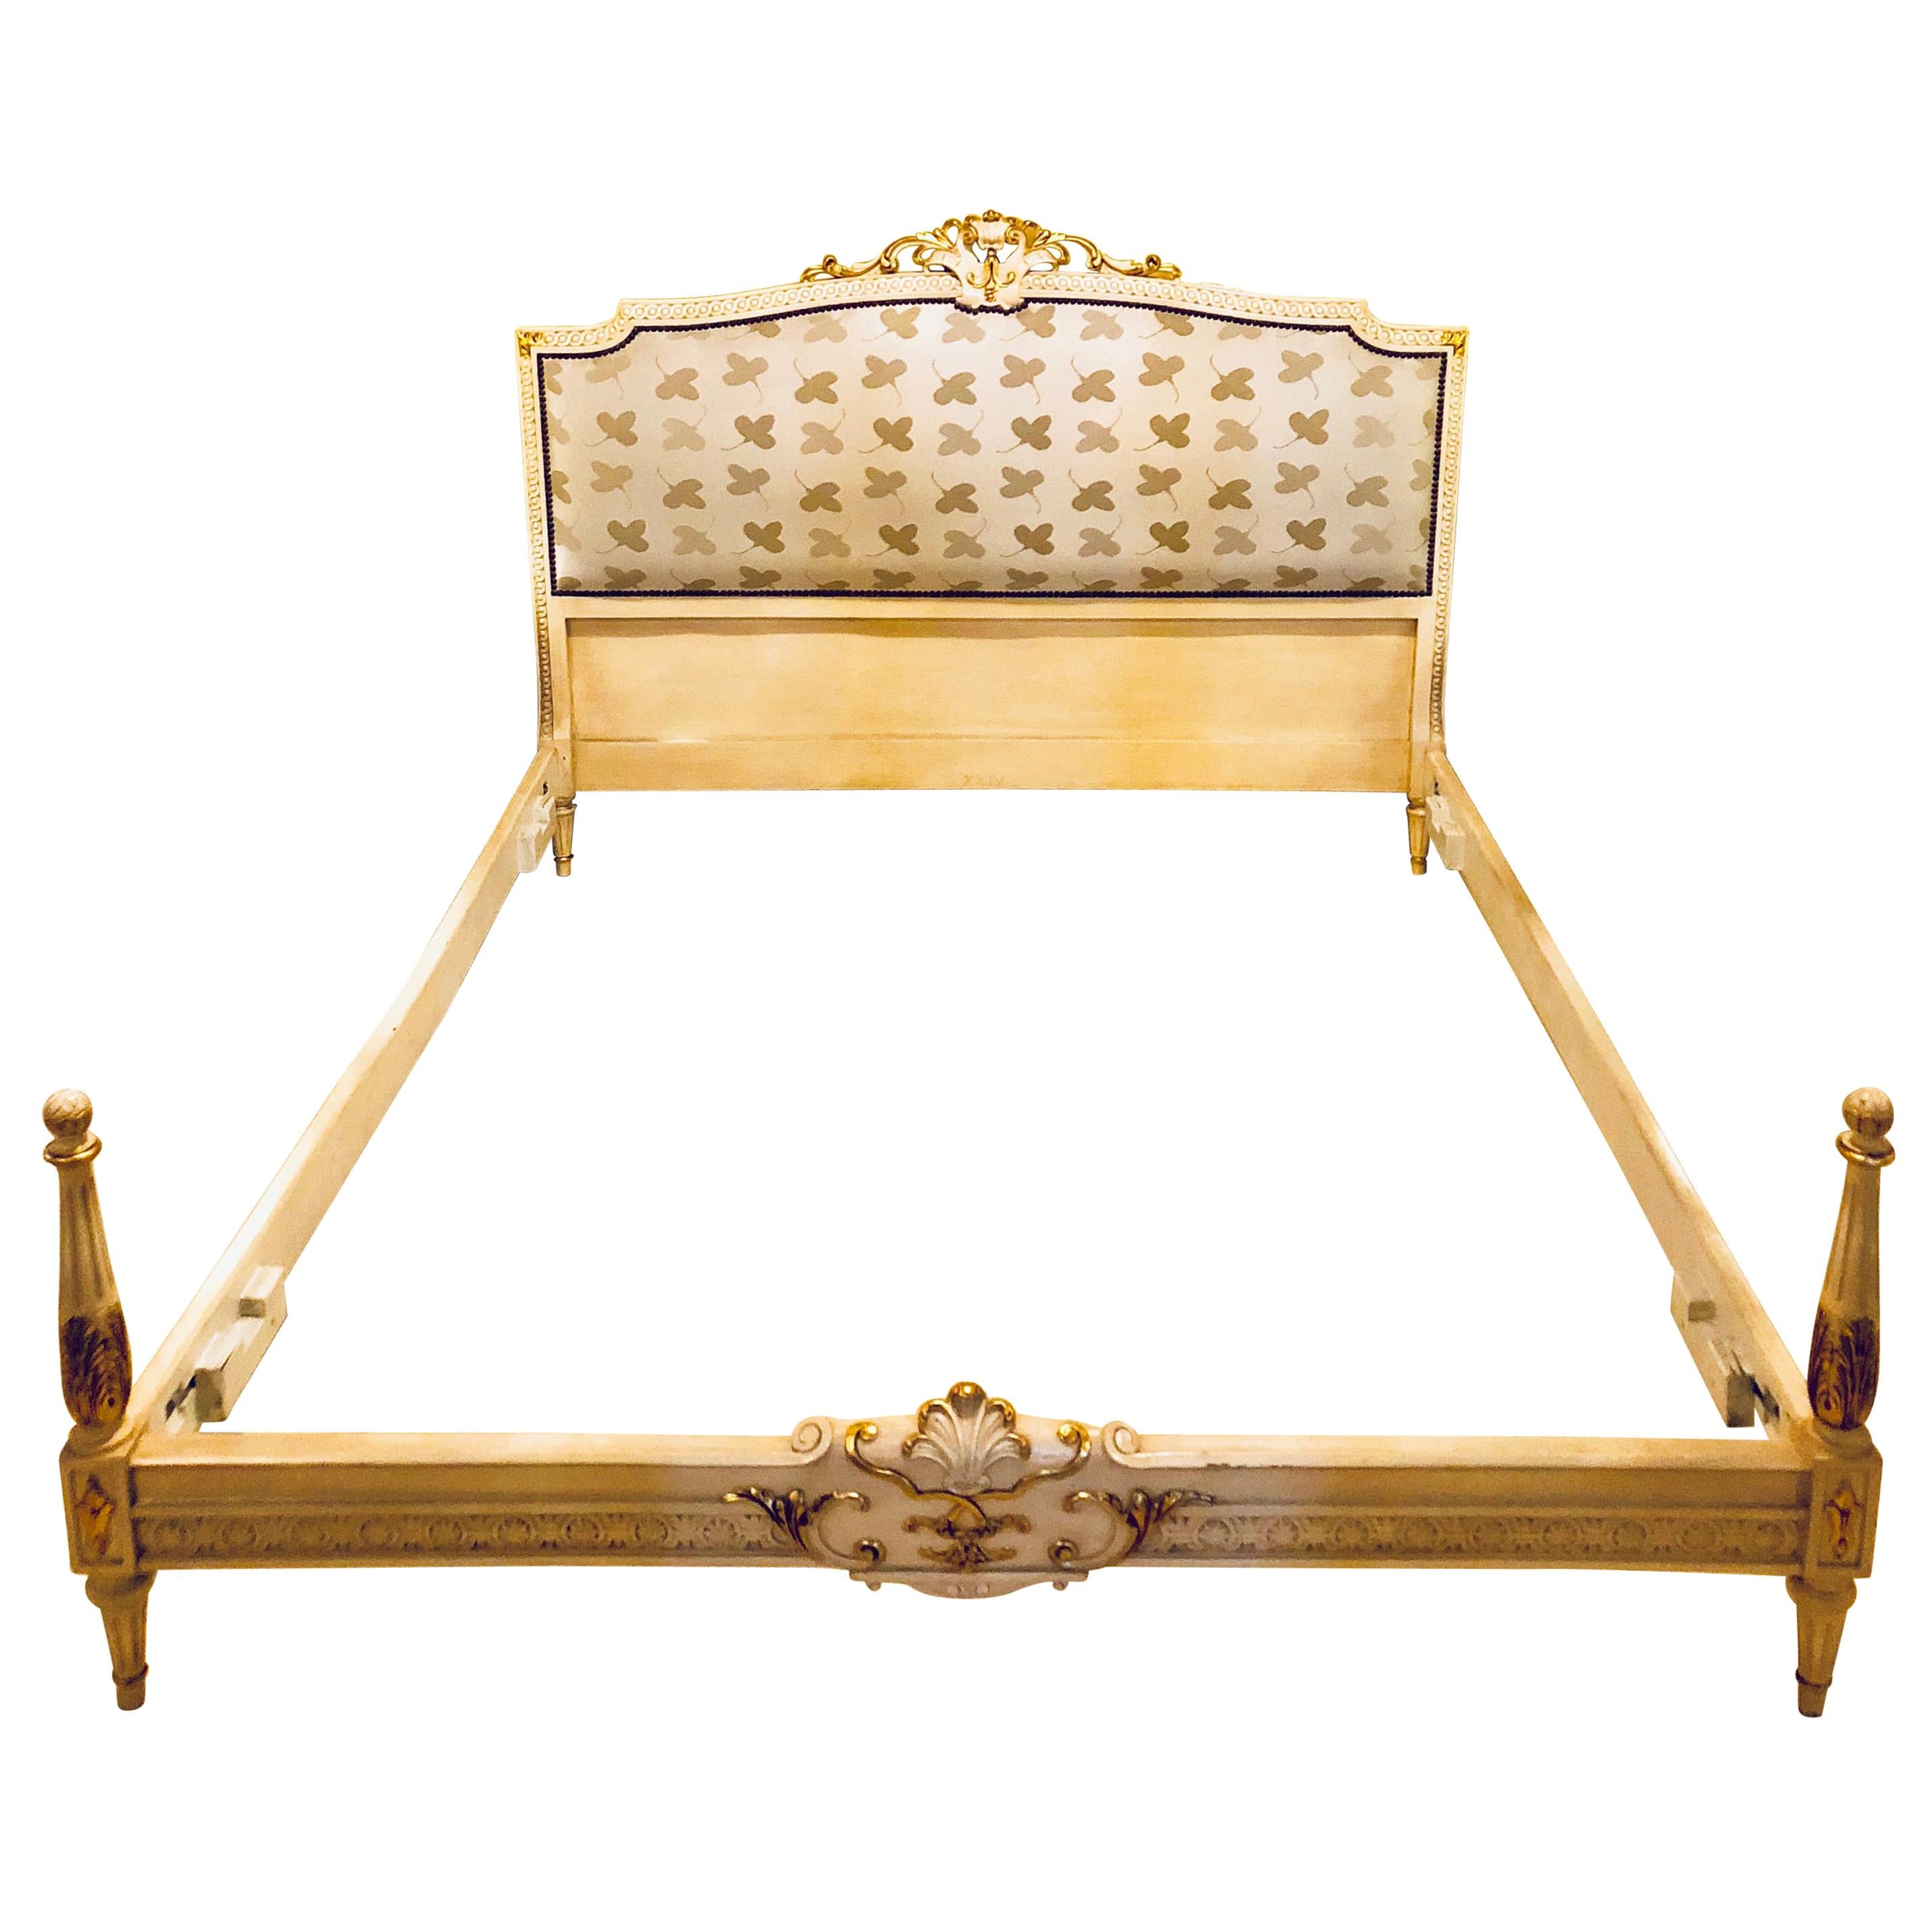 Painted French Louis XVI Style Headboard and Footboard Manner of Maison Jansen